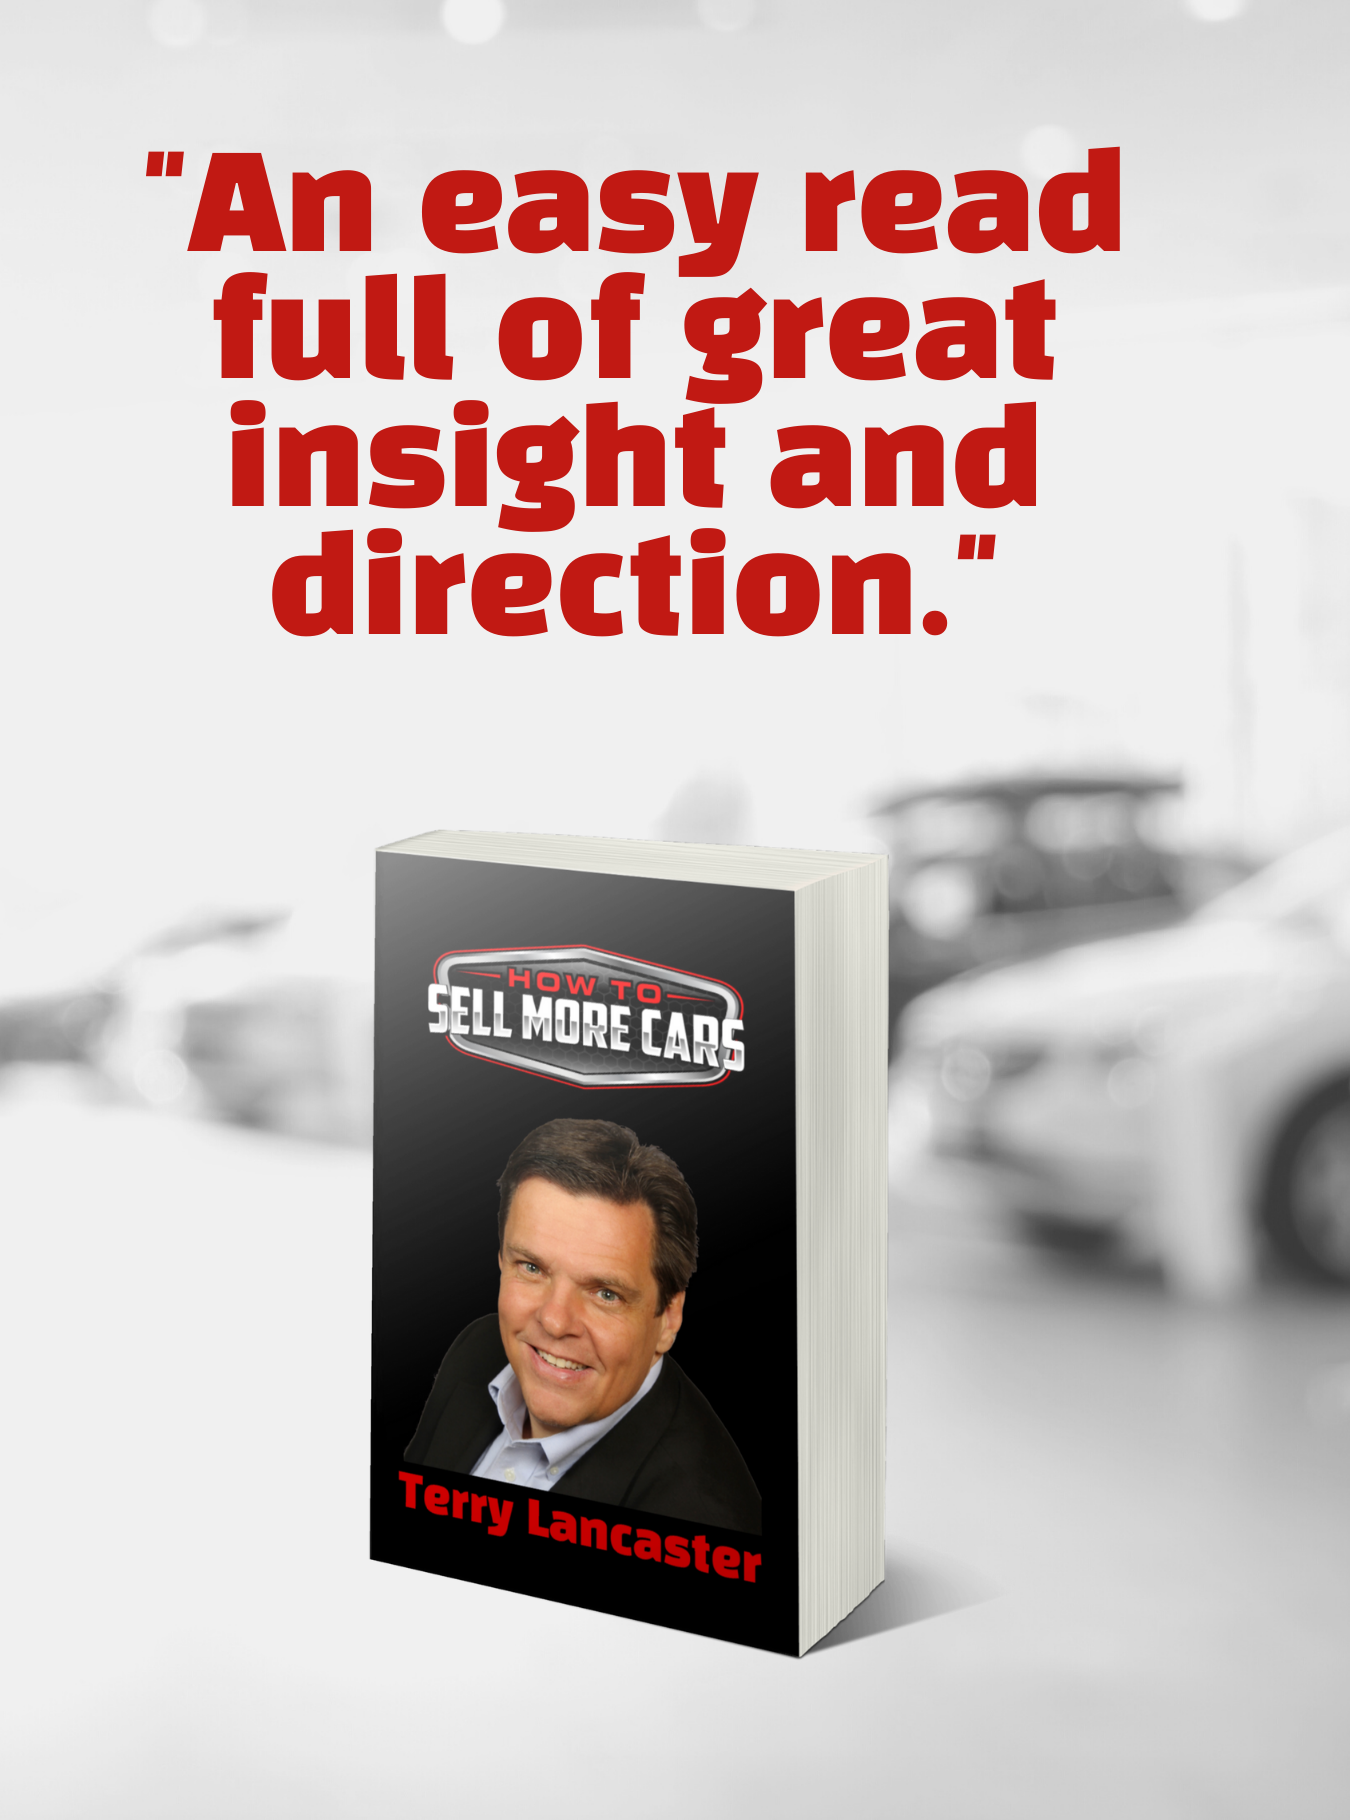 HOW TO SELL MORE CARS book by Terry Lancaster